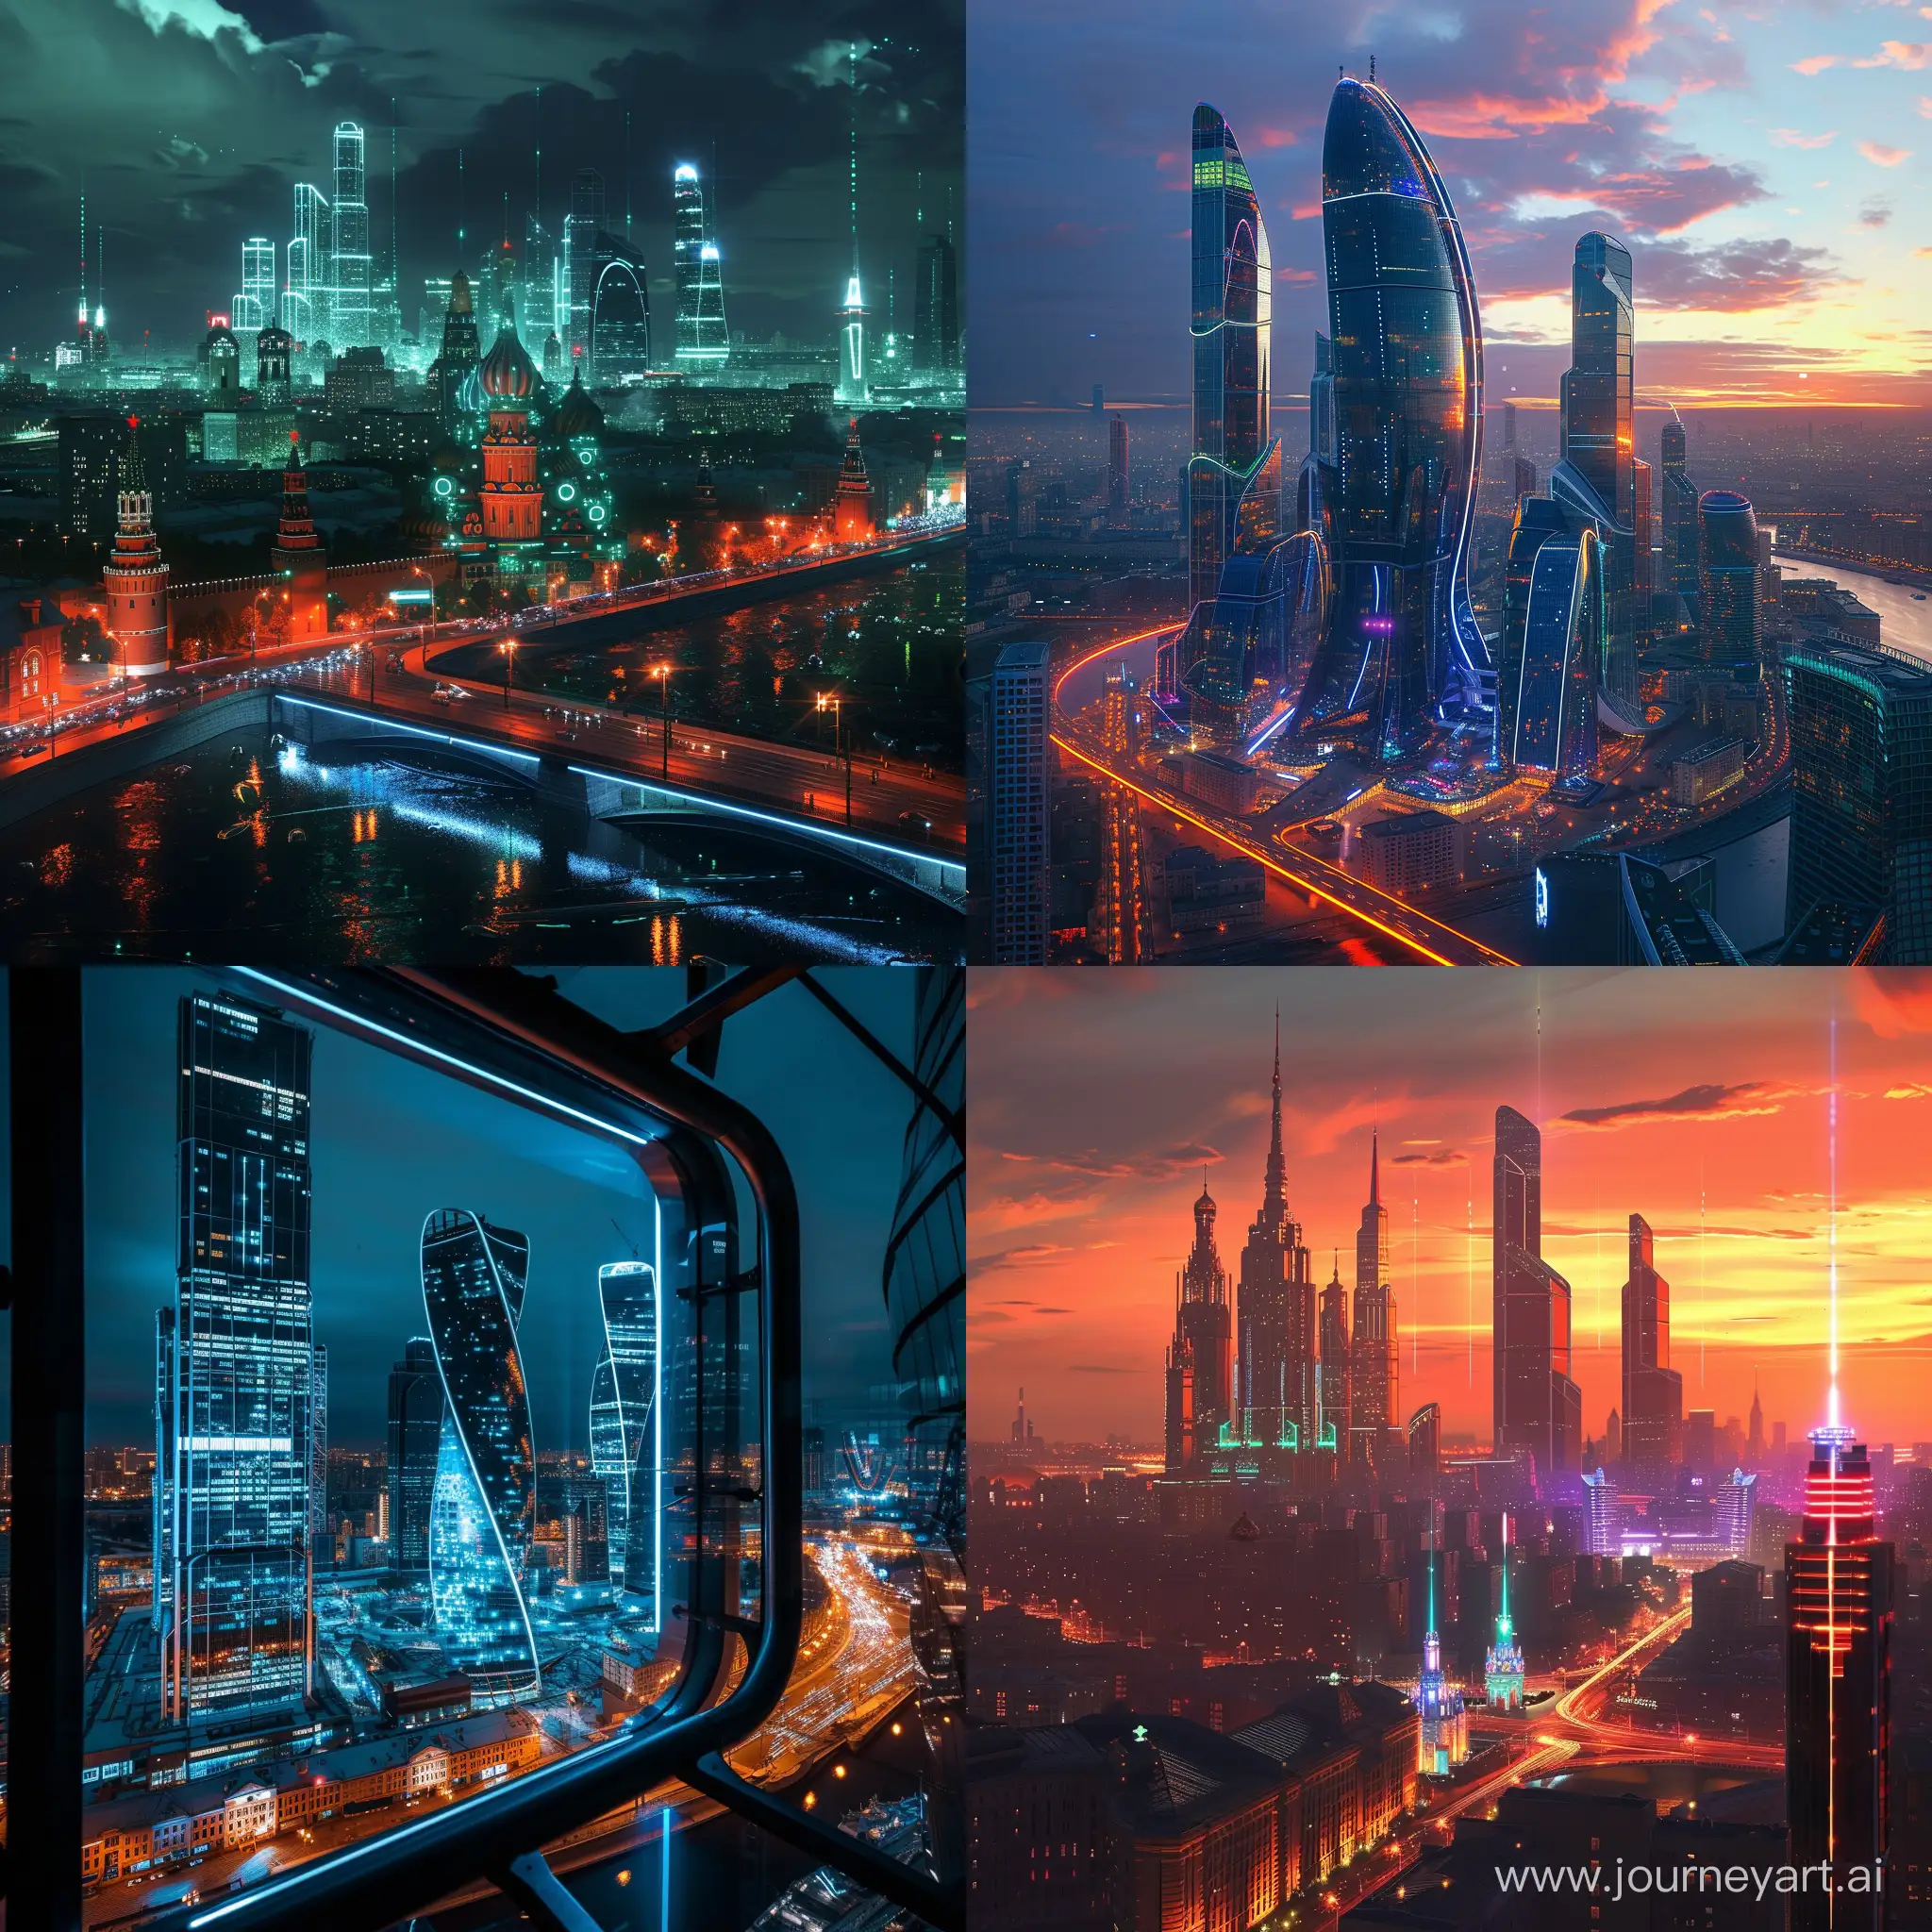 Futuristic-Moscow-Illuminated-with-Quantum-Dot-OLED-Lighting-in-Cinematic-Style